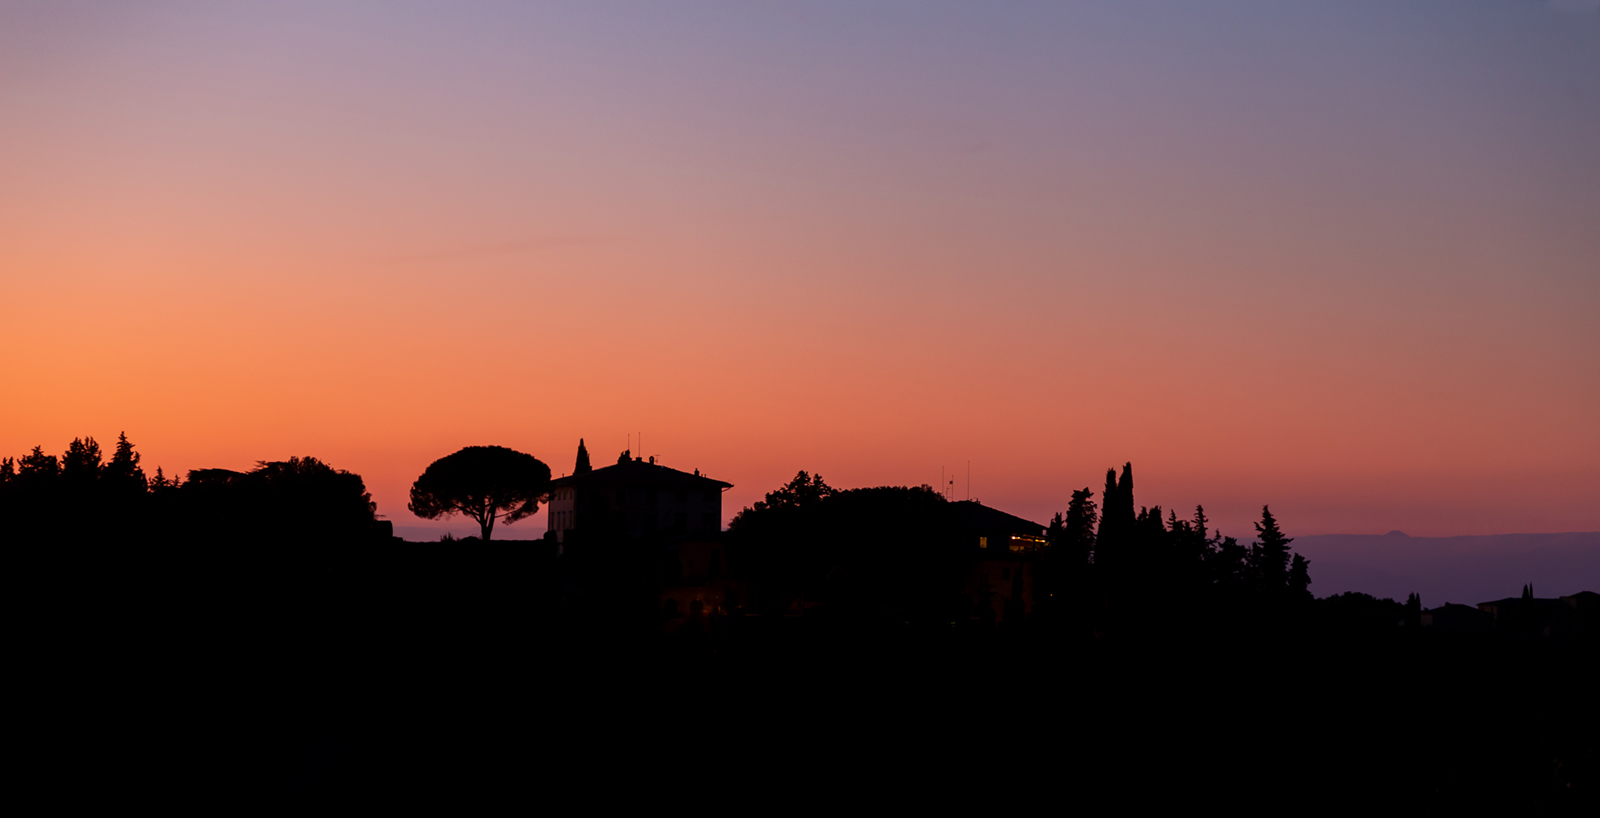 TUSCAN TWILIGHT by Chris Houldsworth